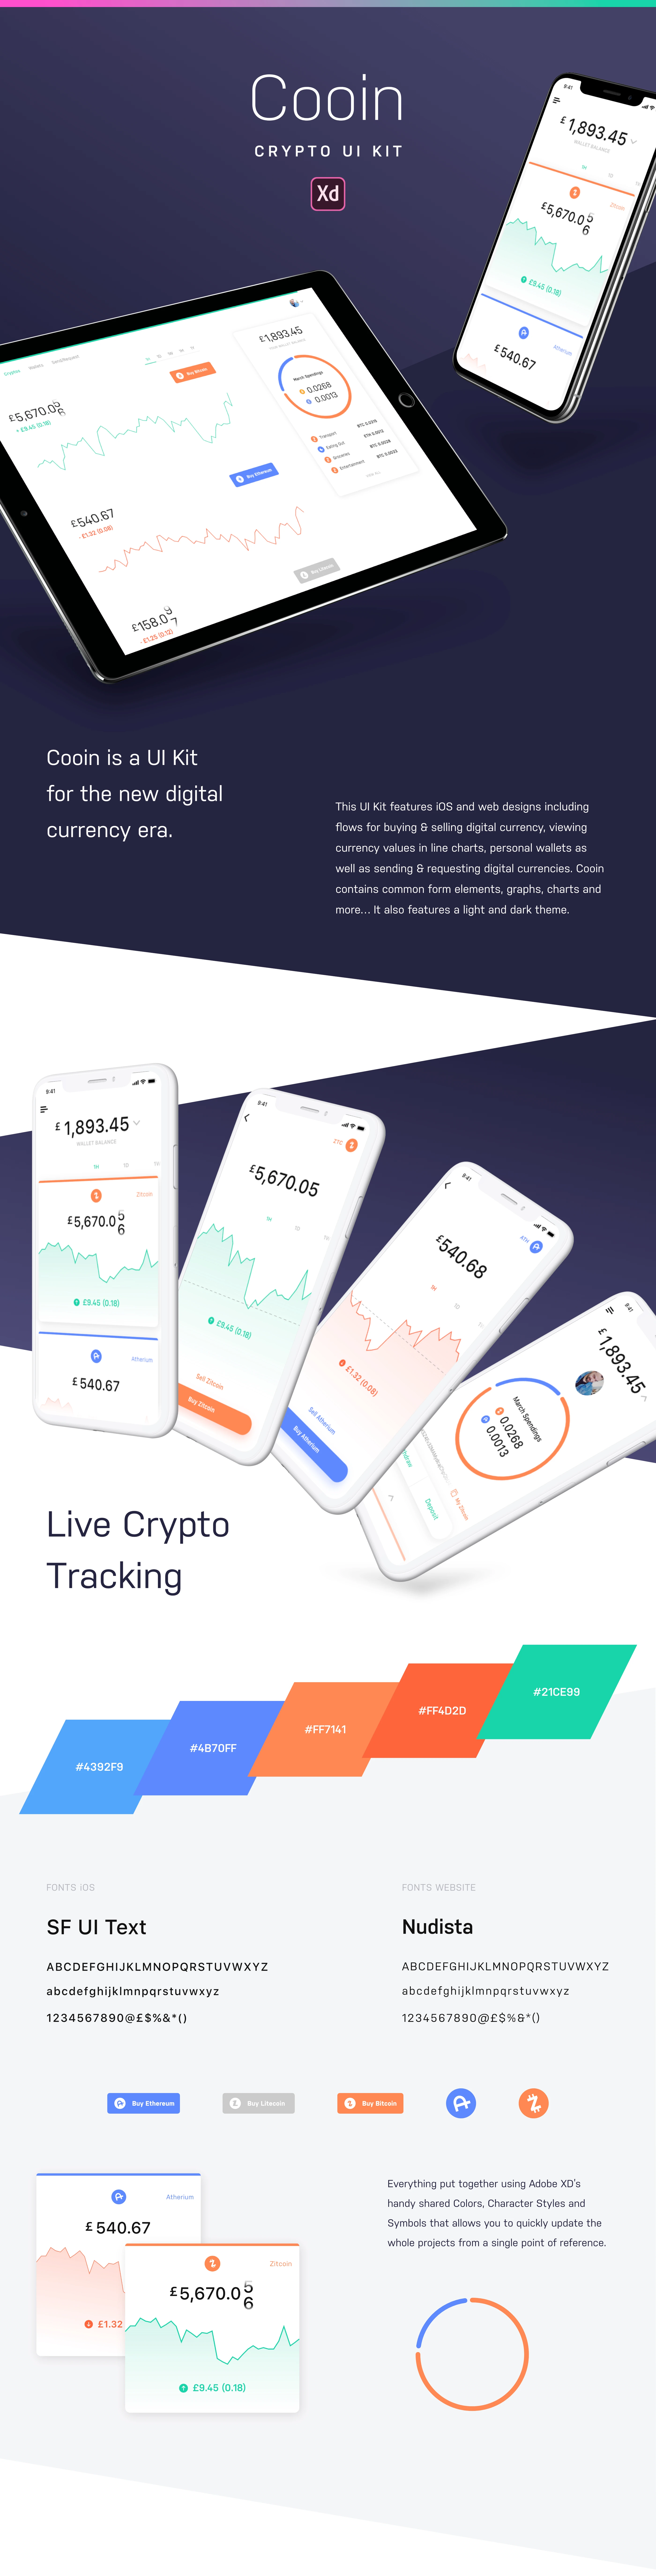 Cooin Crypto UI Kit for Adobe XD - Cooin UI Kit features iOS and web designs including flows for buying & selling digital currency, viewing currency values in line charts, personal wallets as well as sending & requesting digital currencies. Cooin contains common form elements, graphs, charts and more… It also features a light and dark theme.